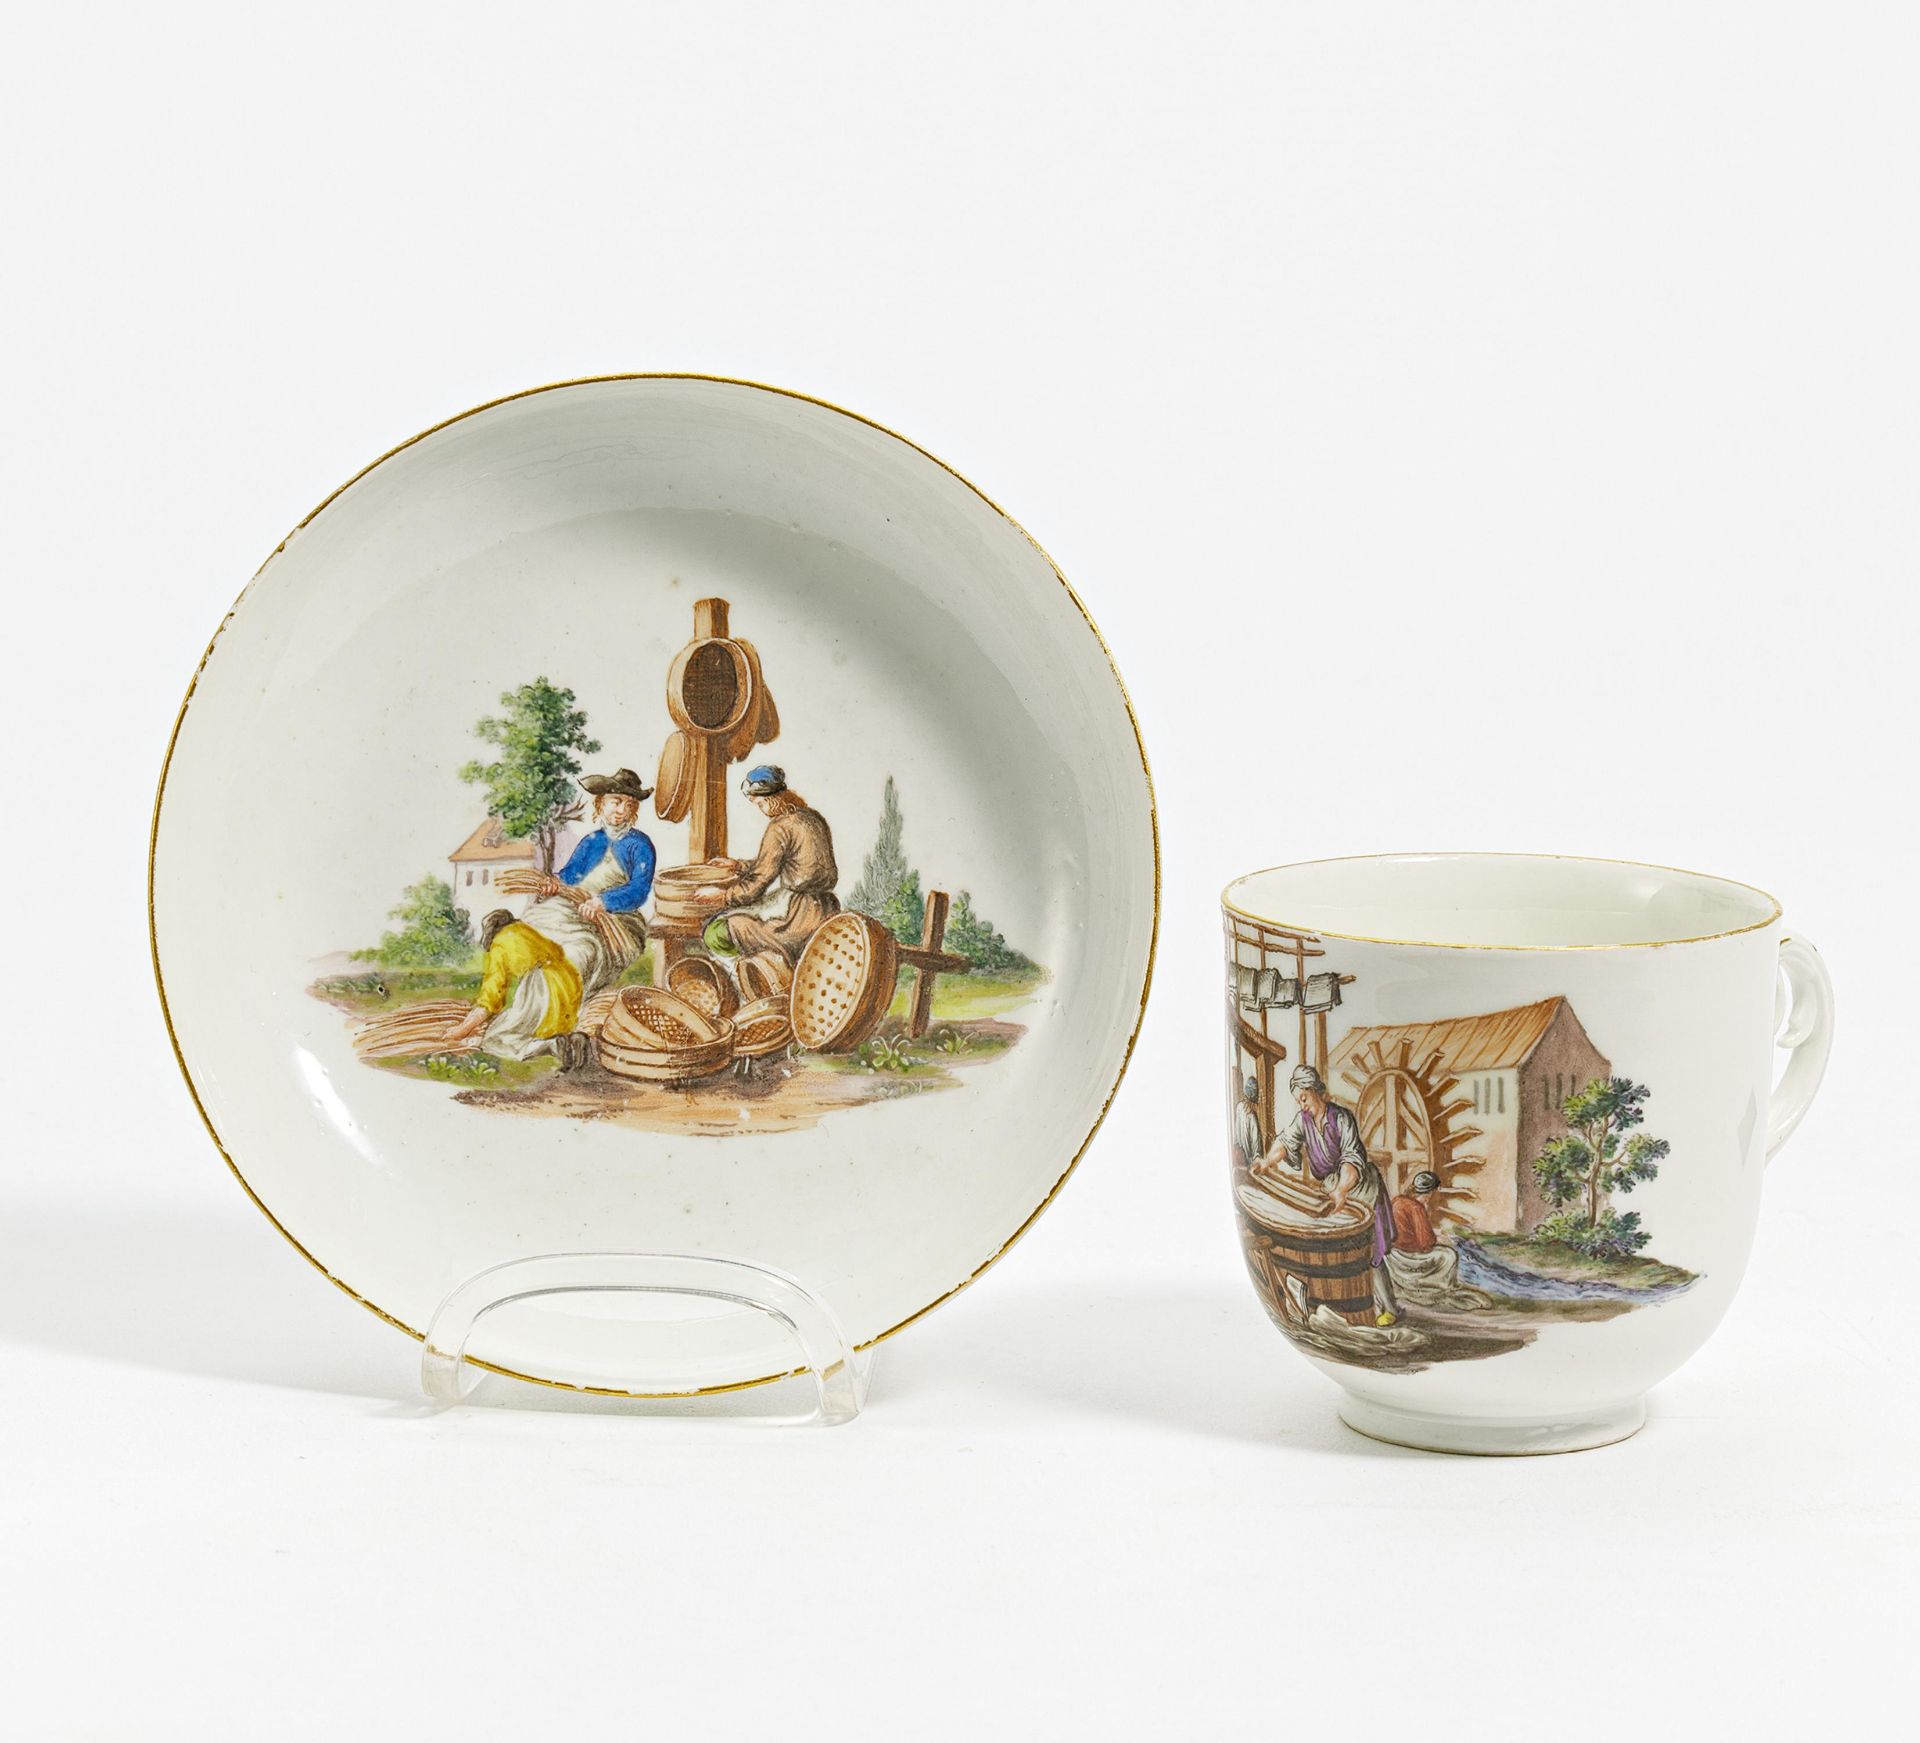 Porcelain cup and saucer with occupation depictions